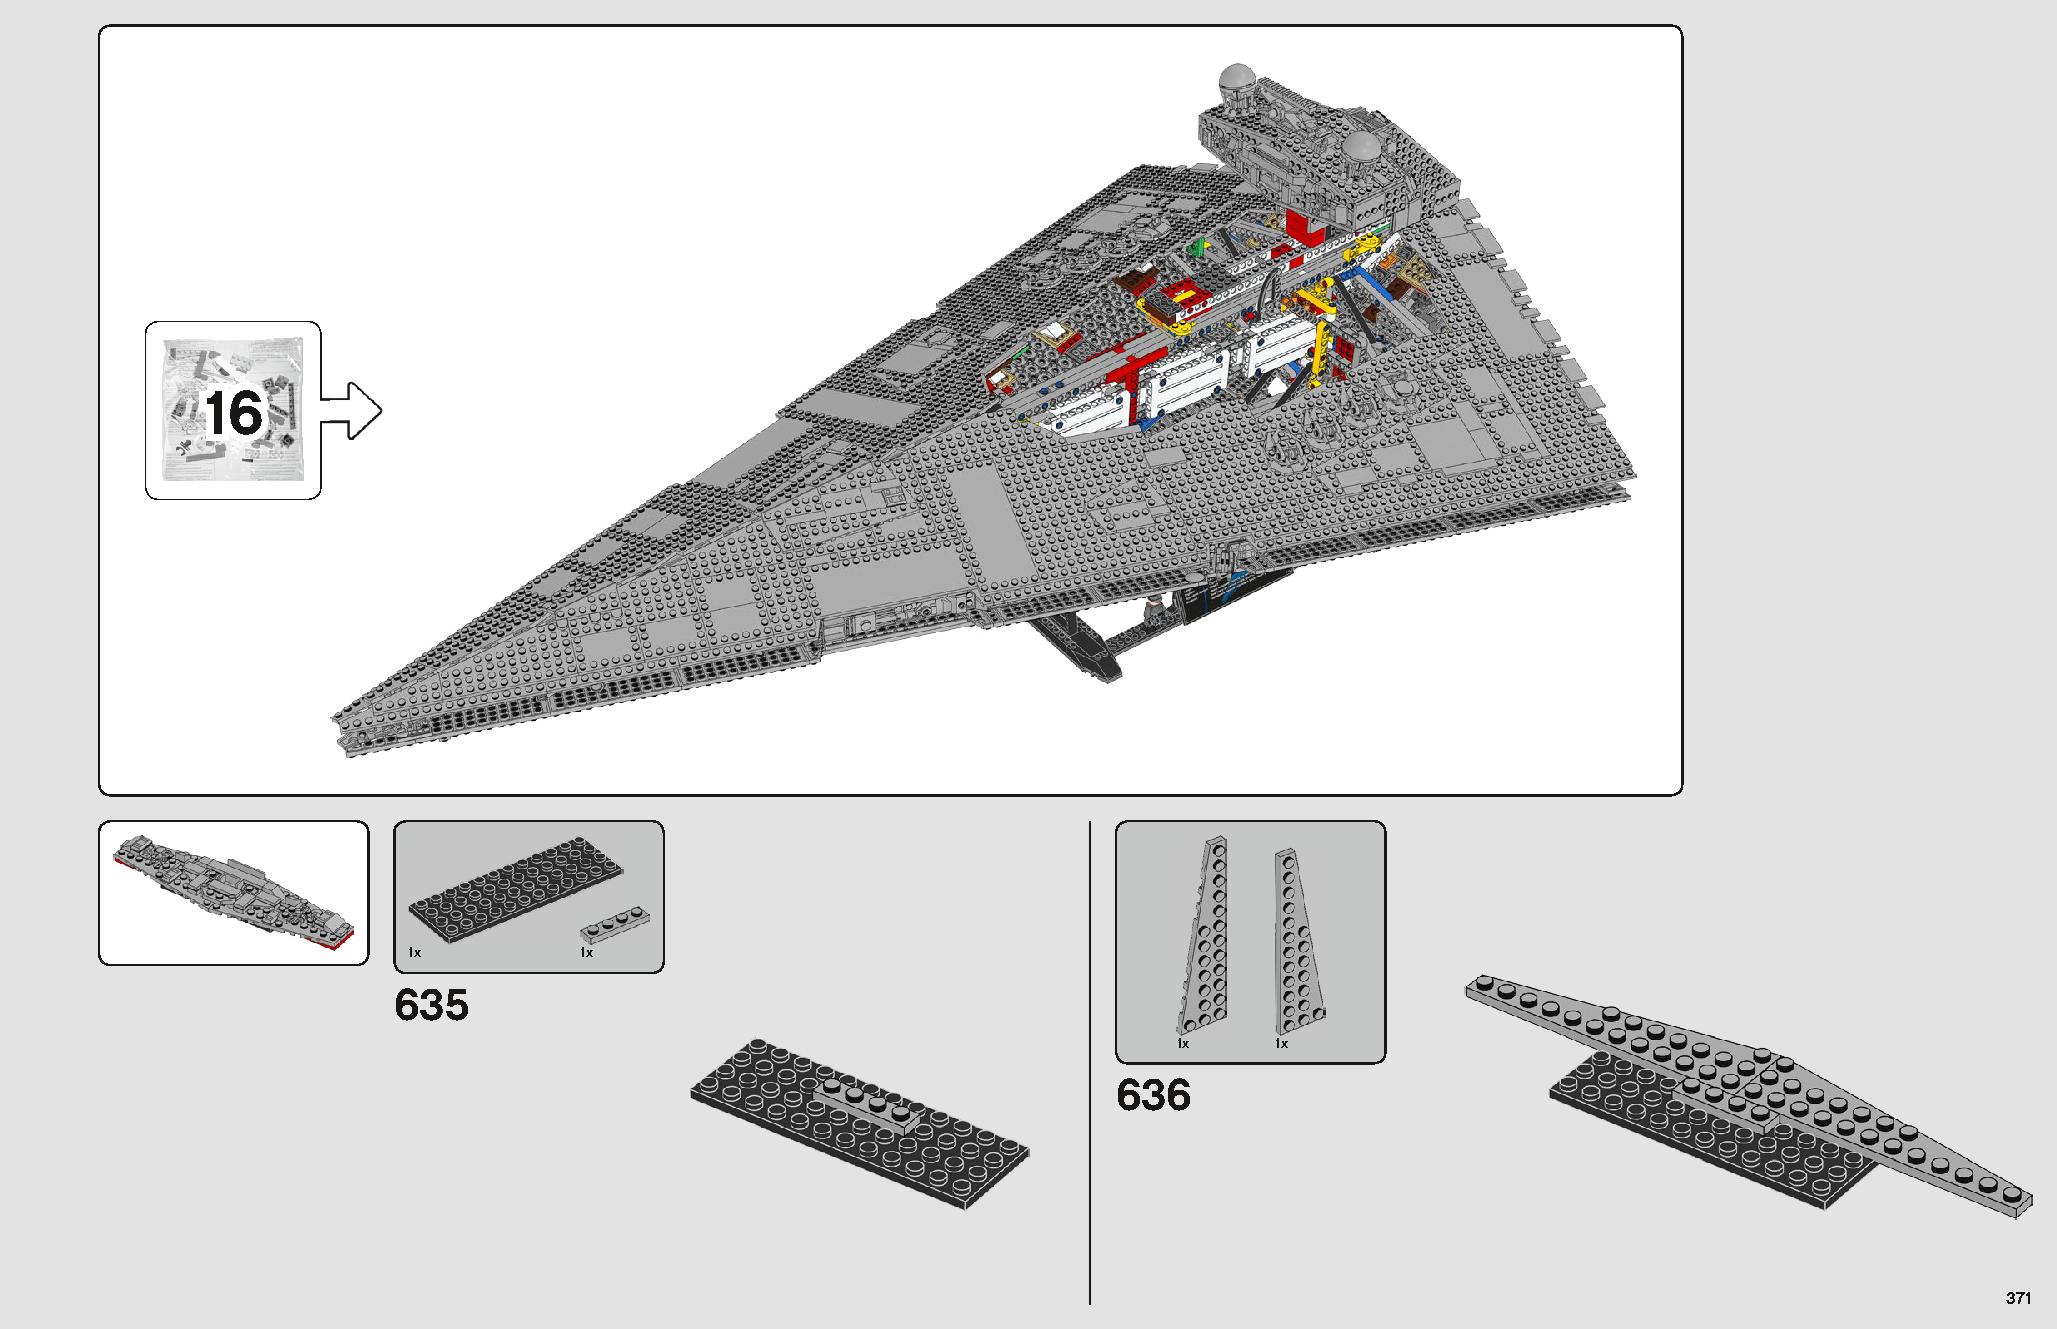 Imperial Star Destroyer 75252 LEGO information LEGO instructions 371 page